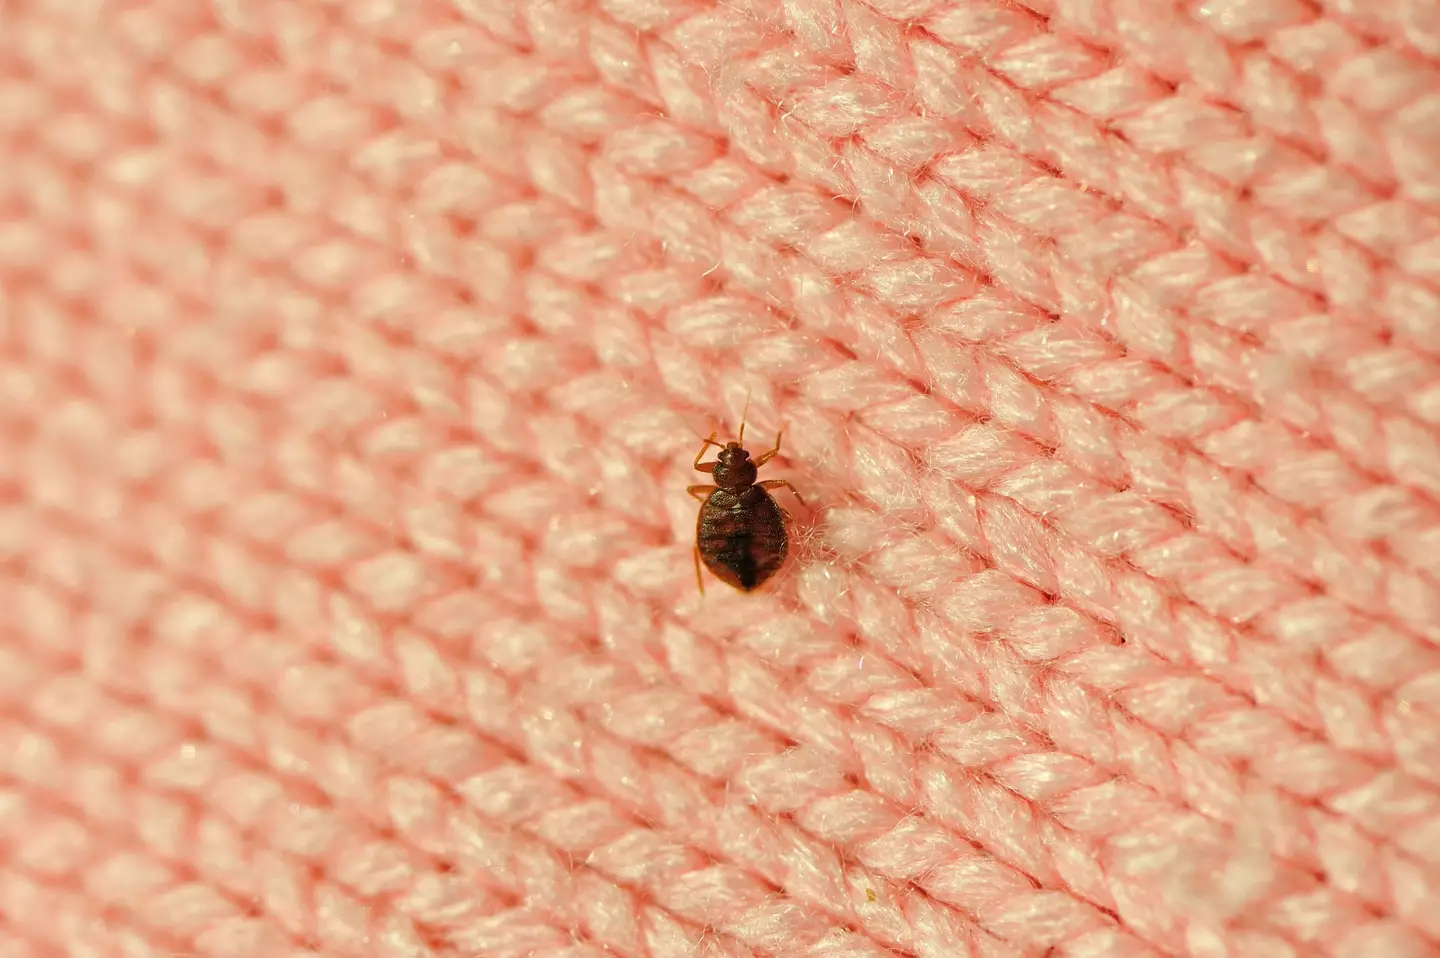 Bedbugs have been spotted all over Paris.